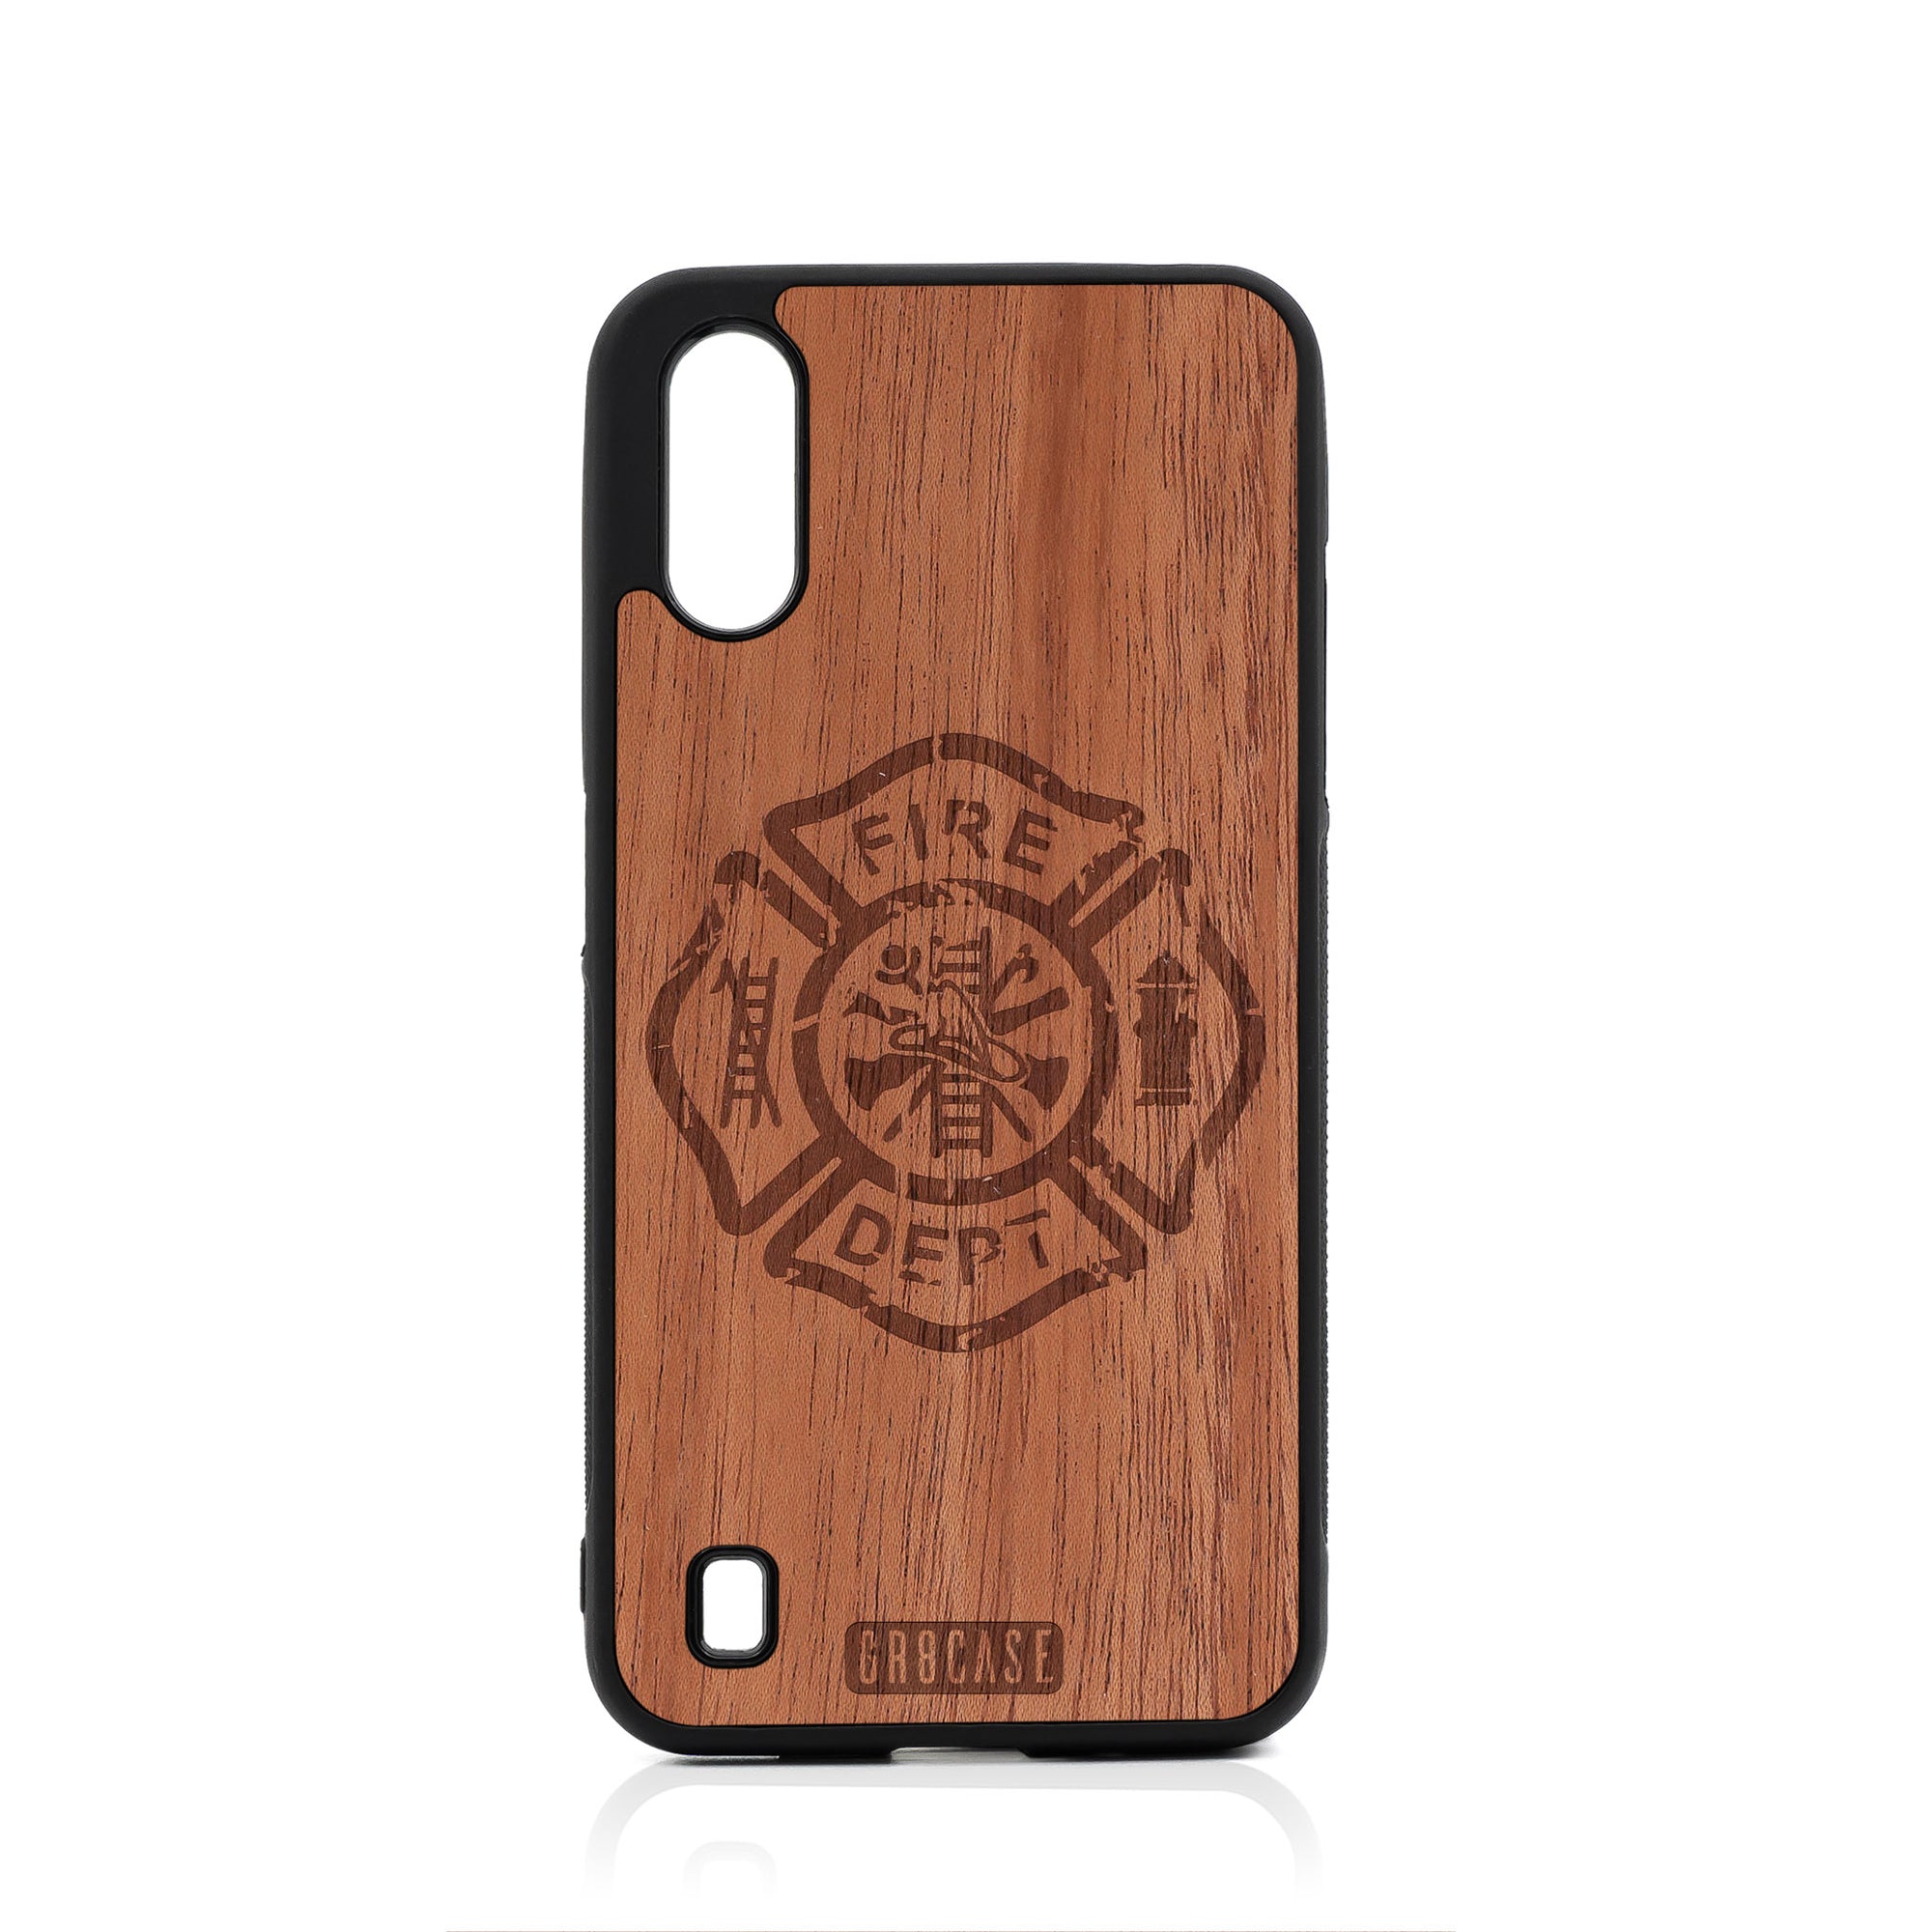 Fire Department Design Wood Case For Samsung Galaxy A01